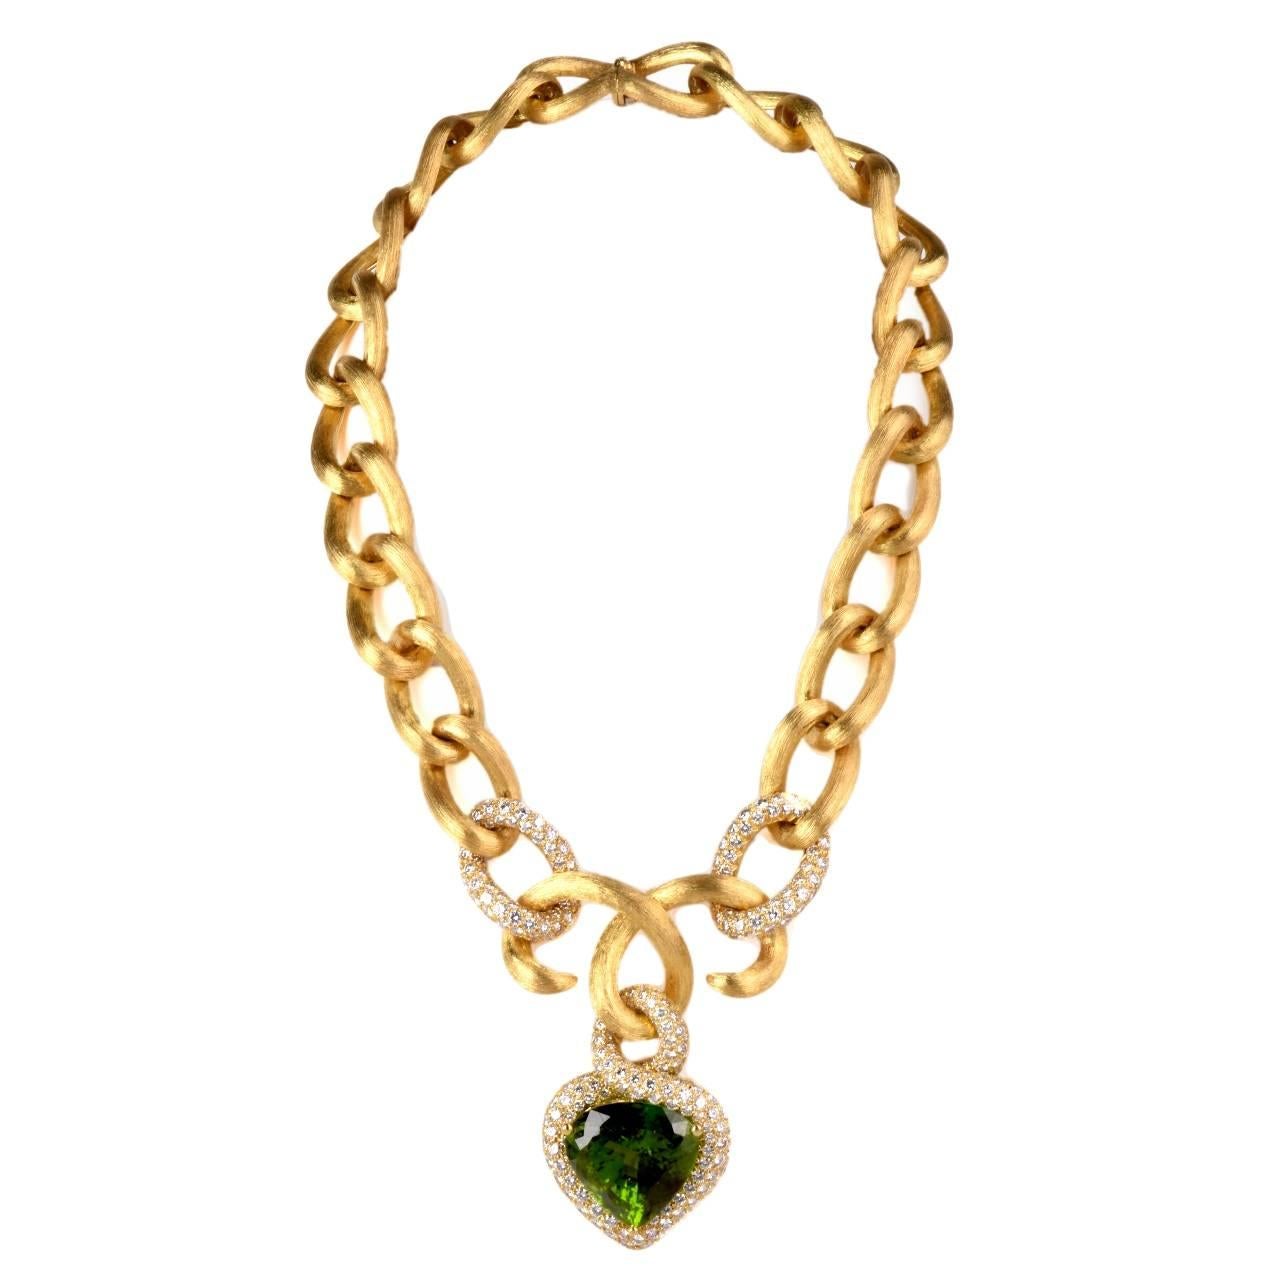 This exquisite rare size peridot diamond pendant necklace is an authentic piece designed by Henry Dunay, bearing the designer's signature. It comprises a breath-taking GIA certified Pear Shape modified brilliant-cut peridot approx. 45.65 cts of